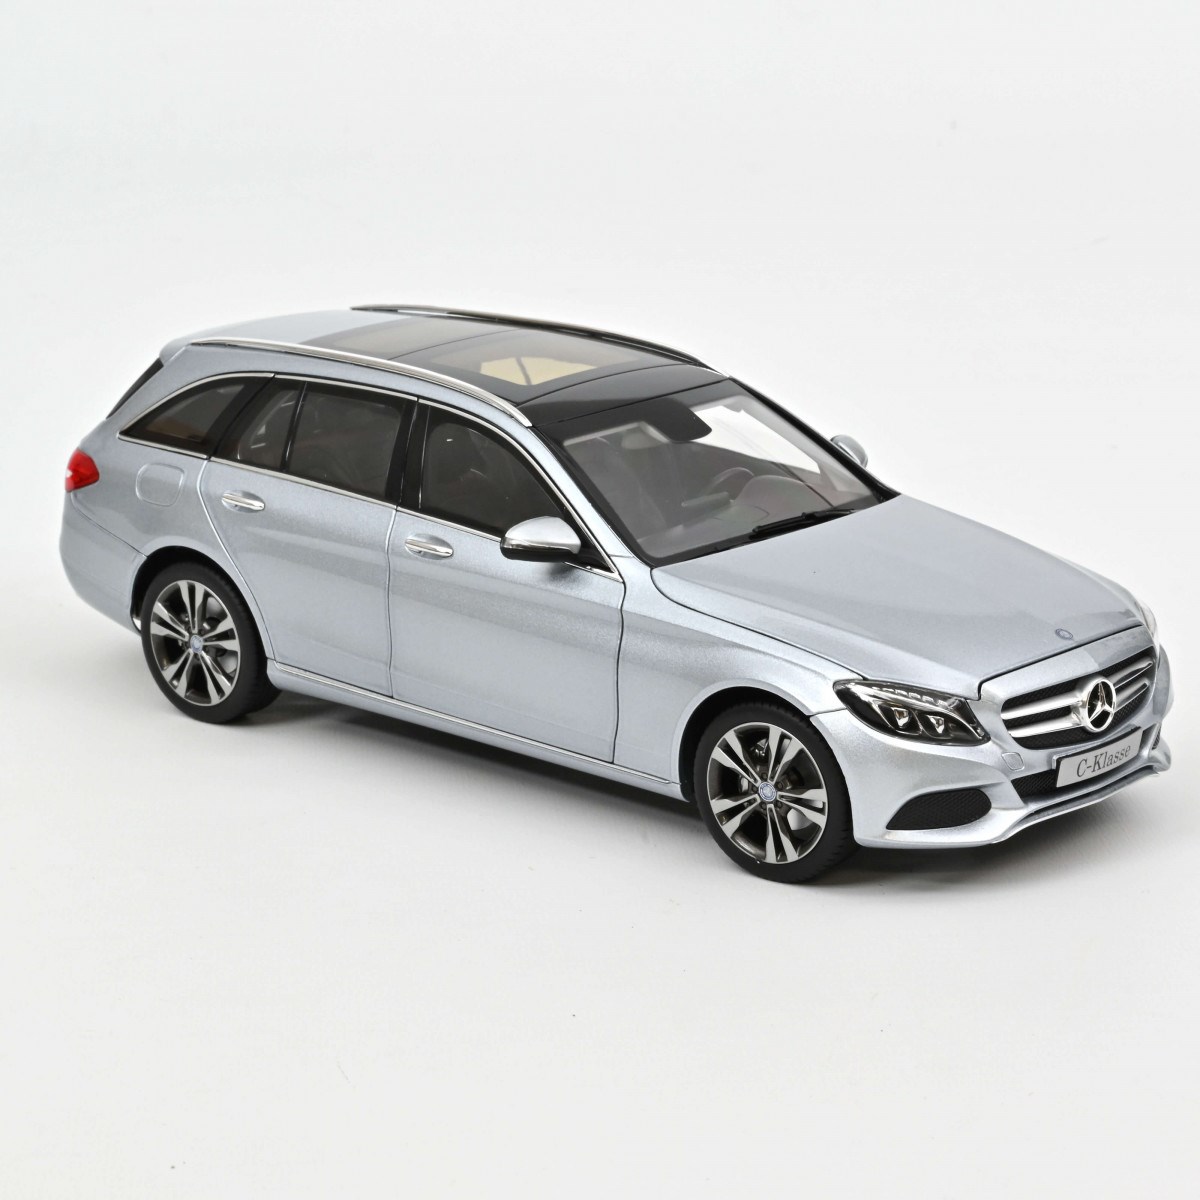 What is a Mercedes C-Class T model?